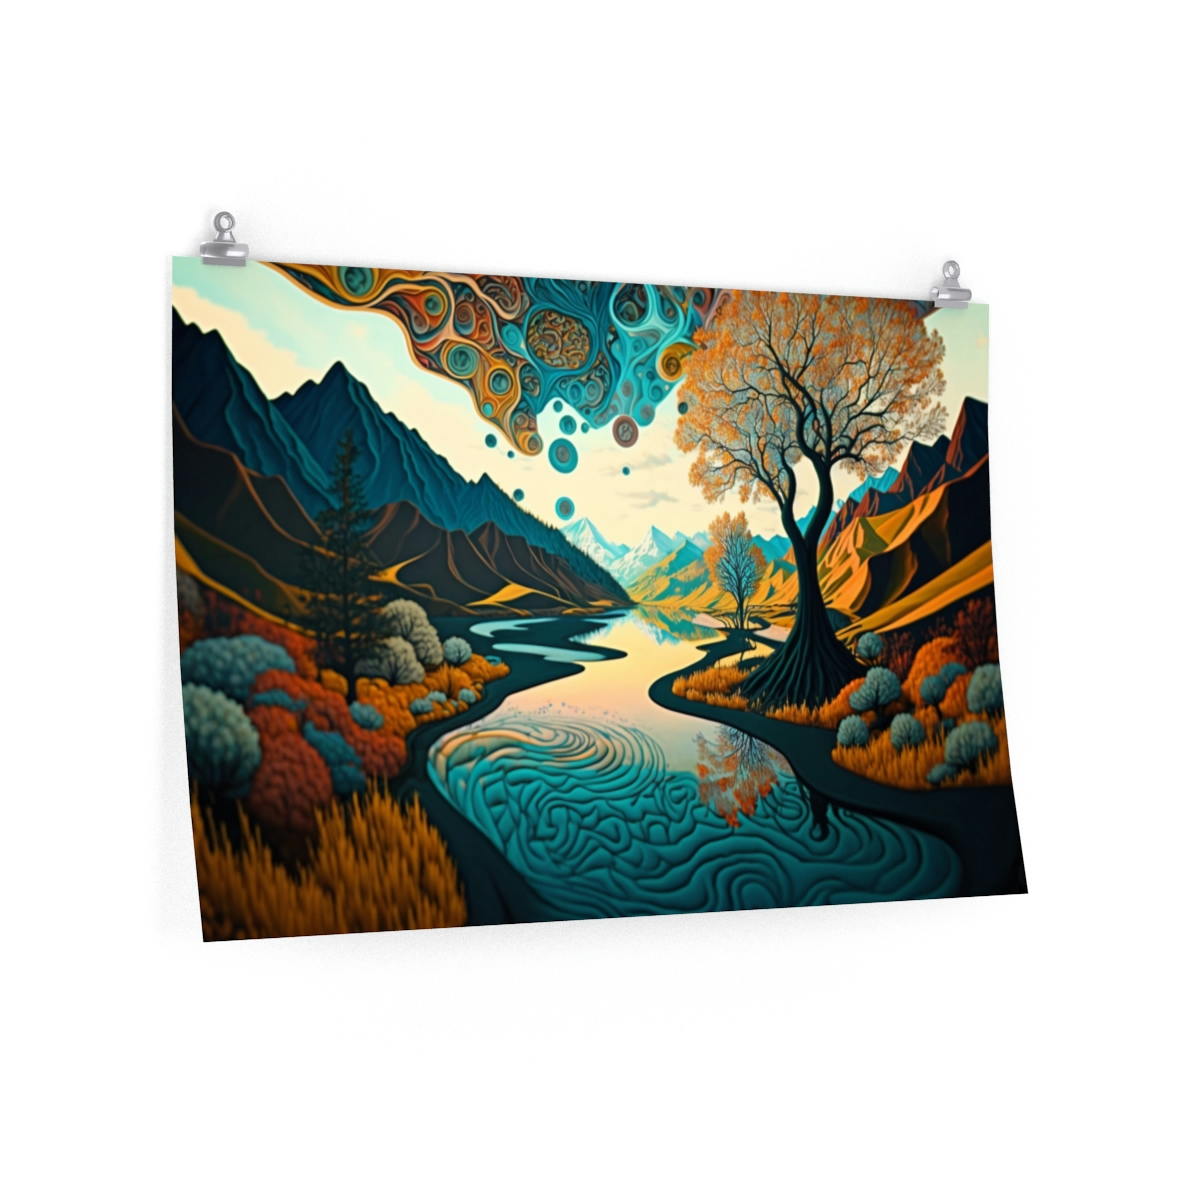 Trippy Posters: The Timeless River